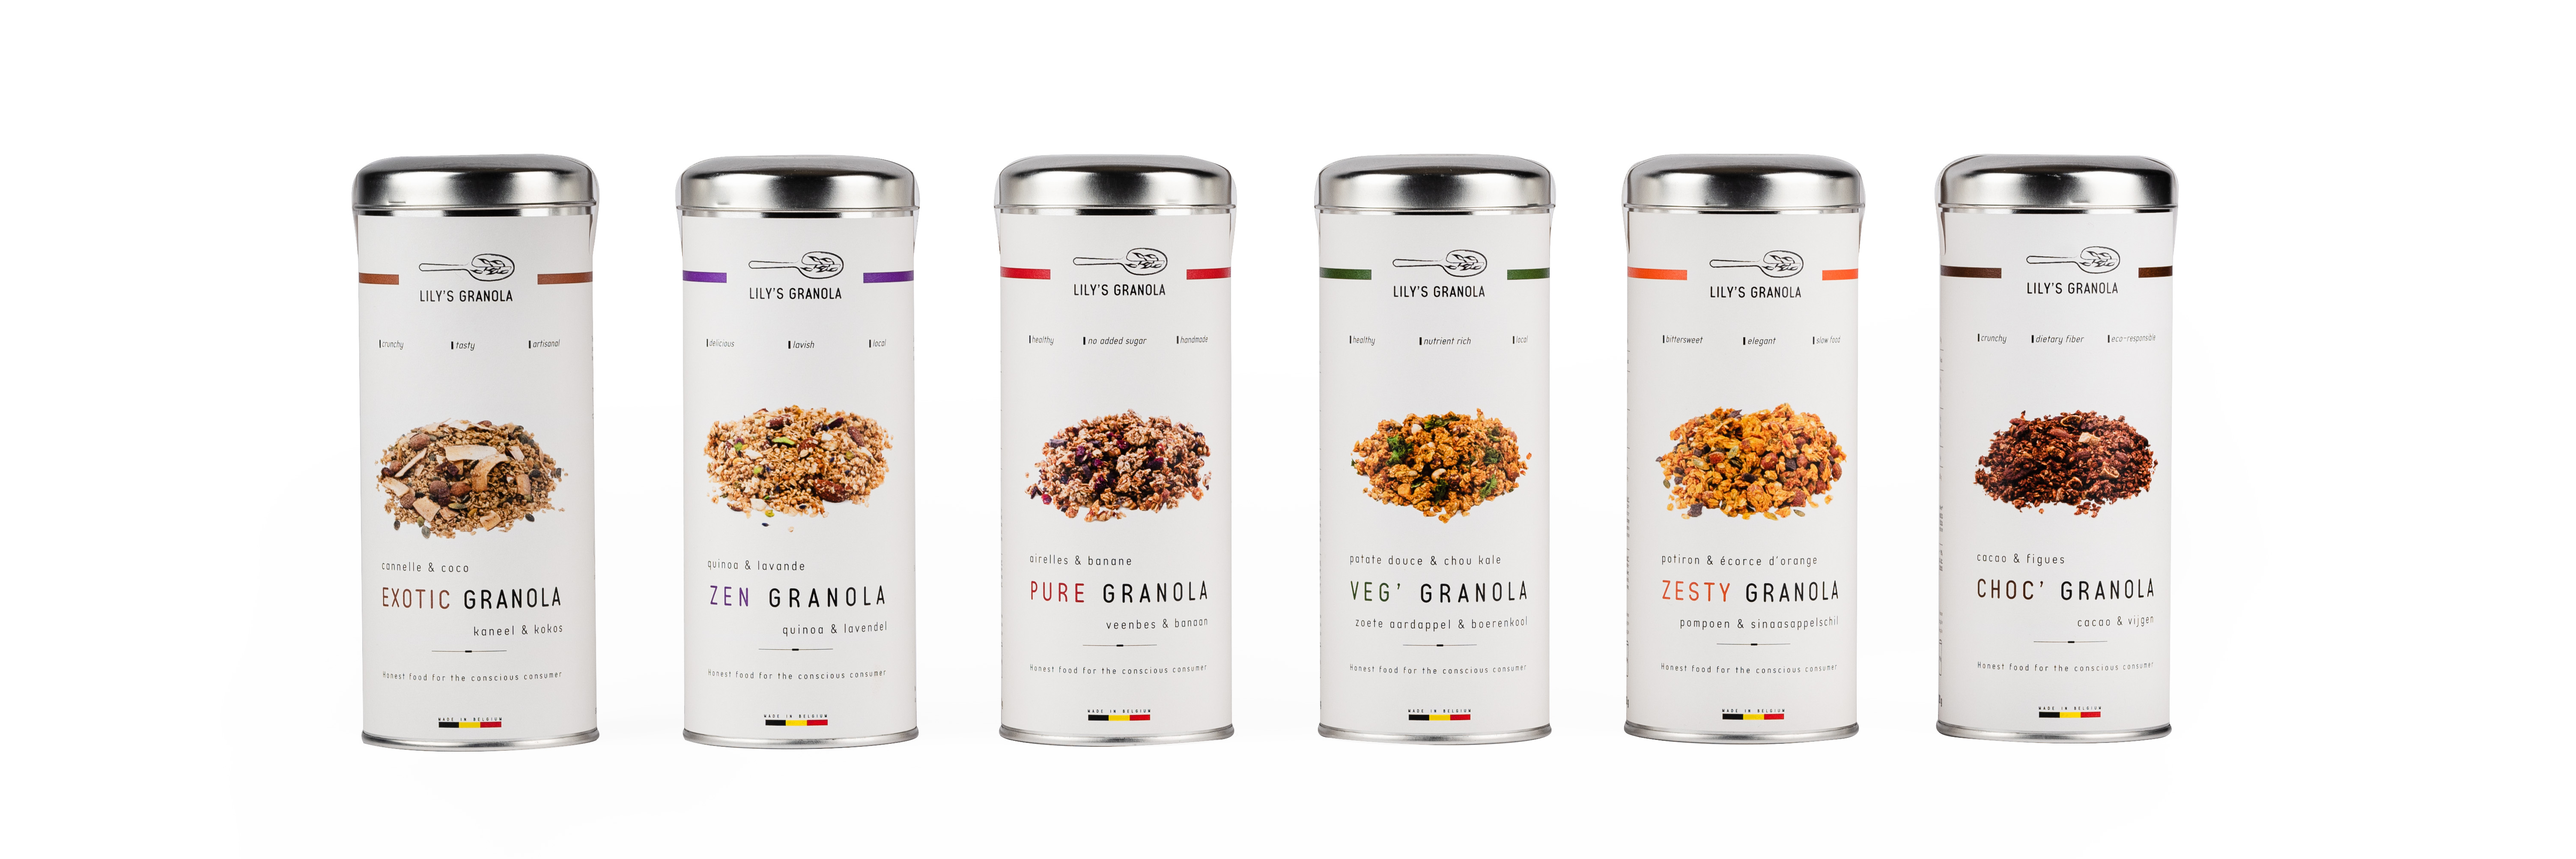 Lily's Granola products